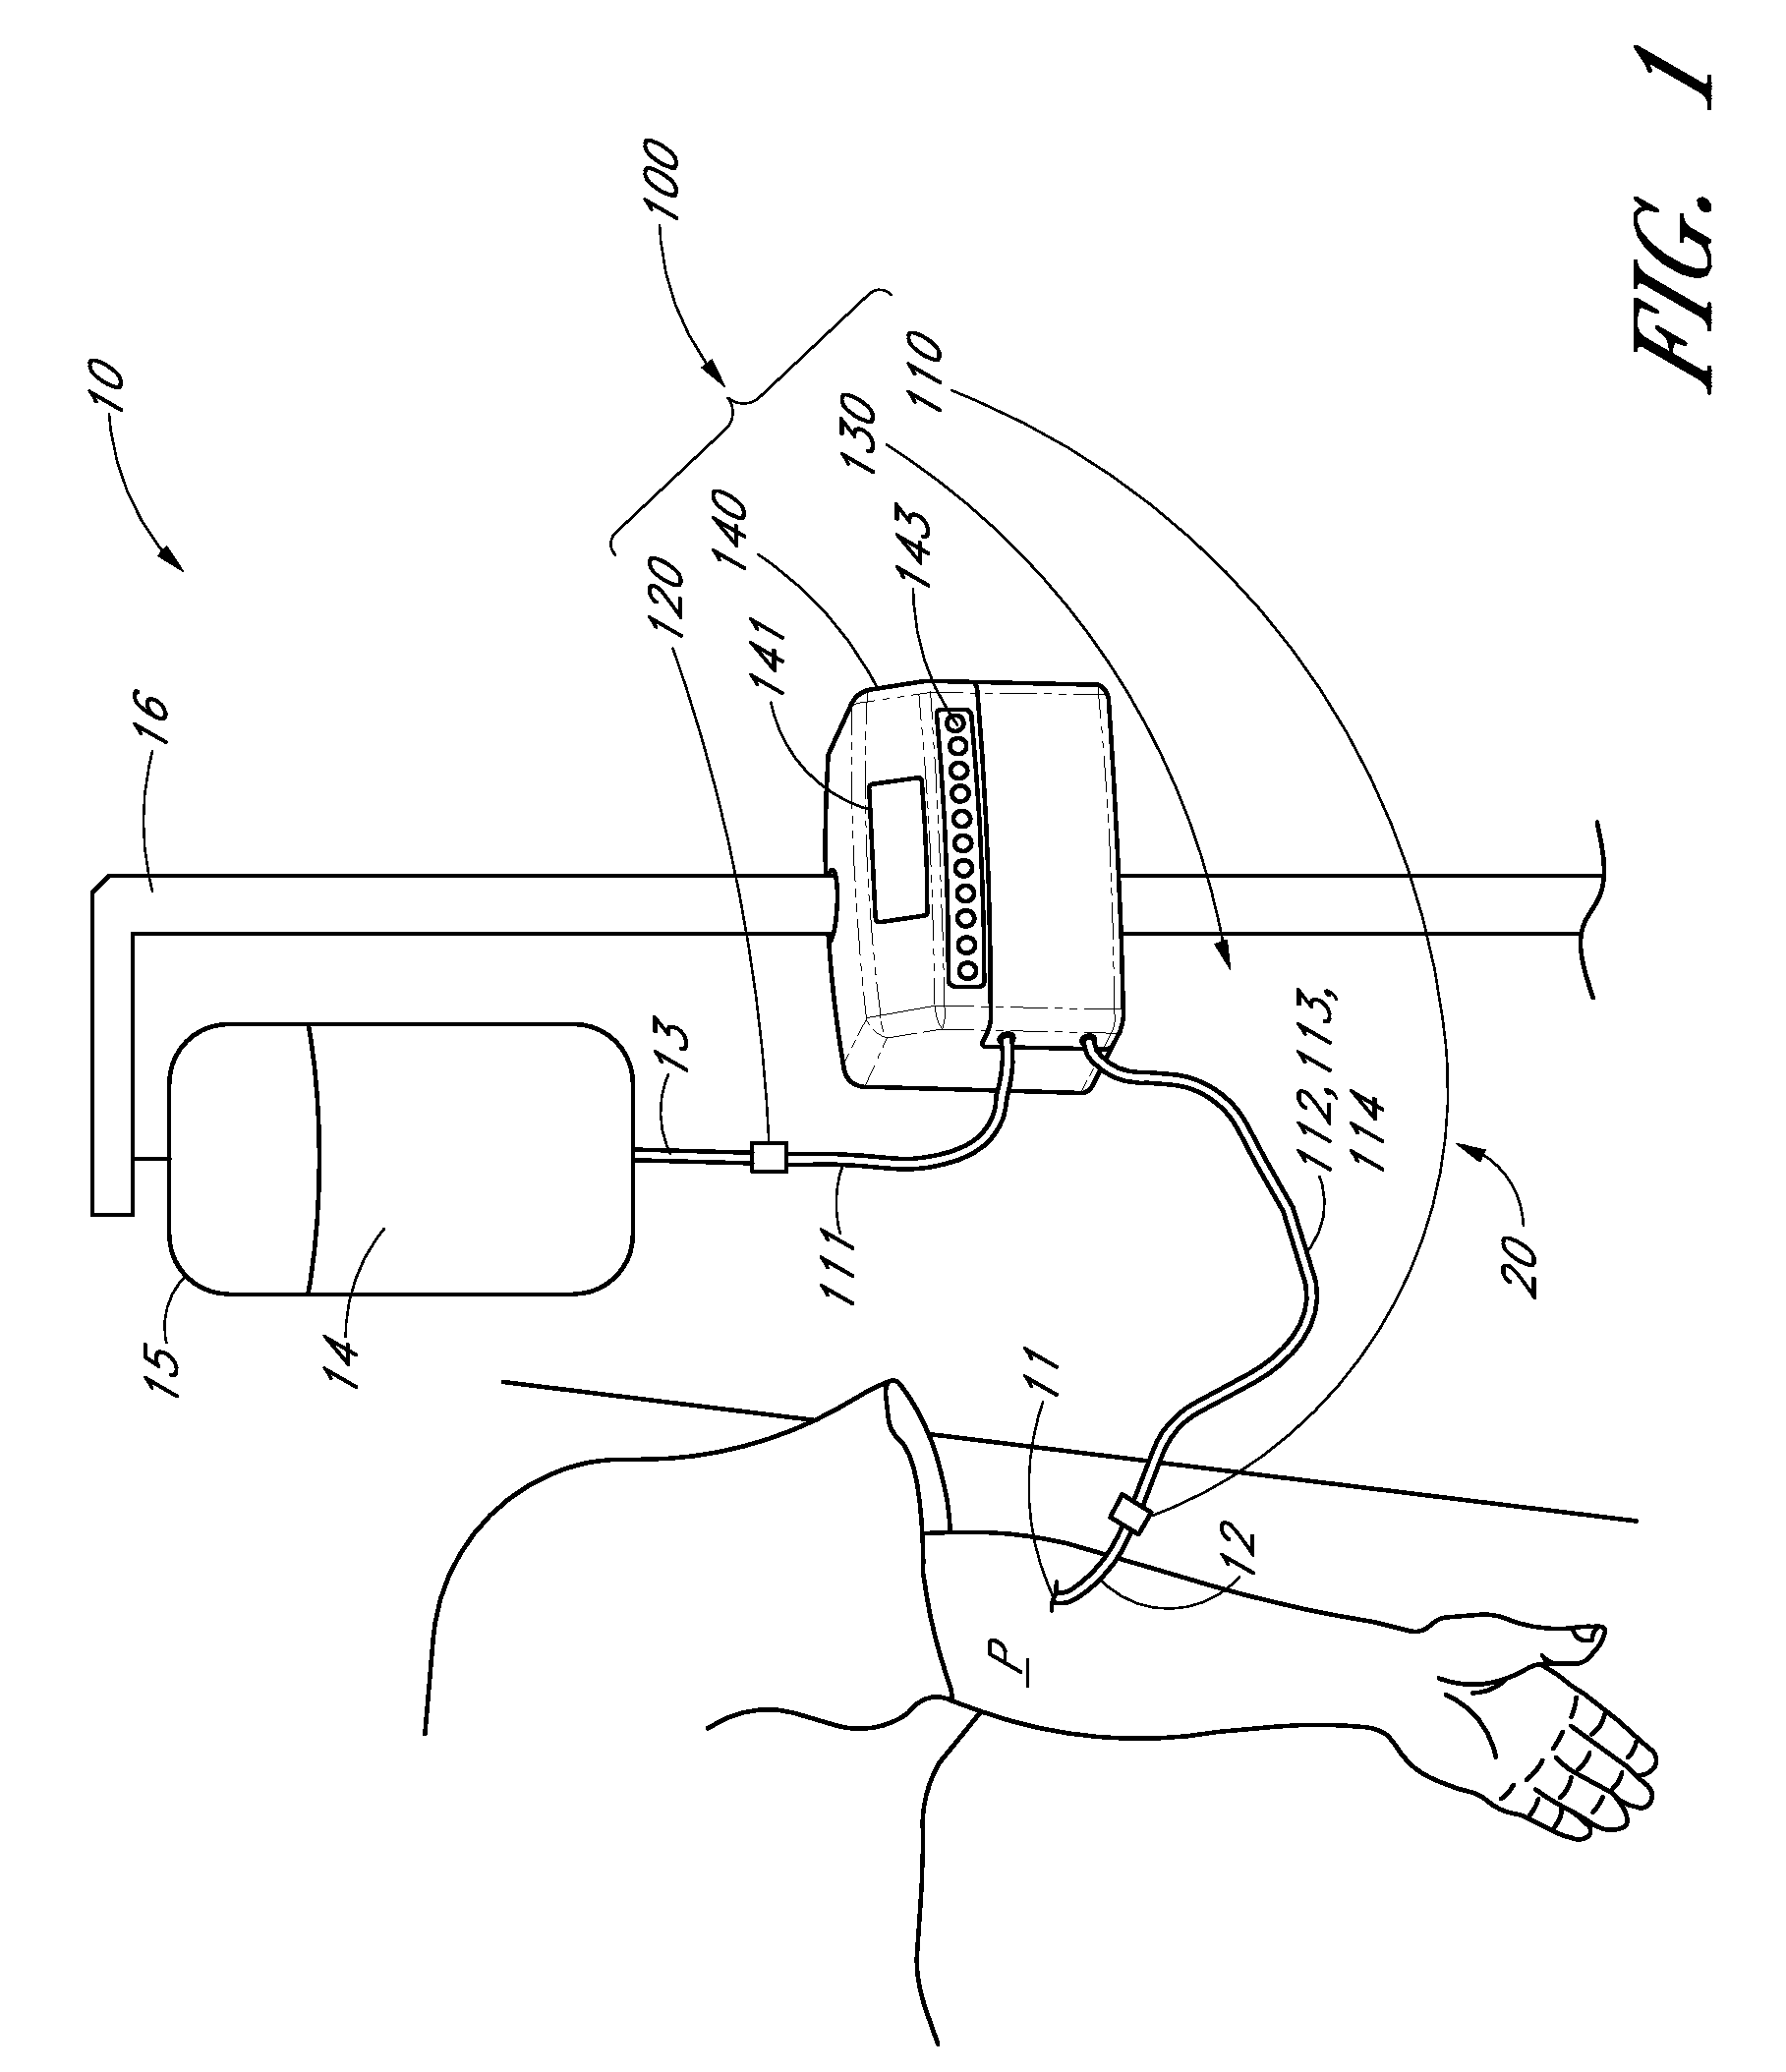 Analyte detection system with periodic sample draw and body fluid analyzer